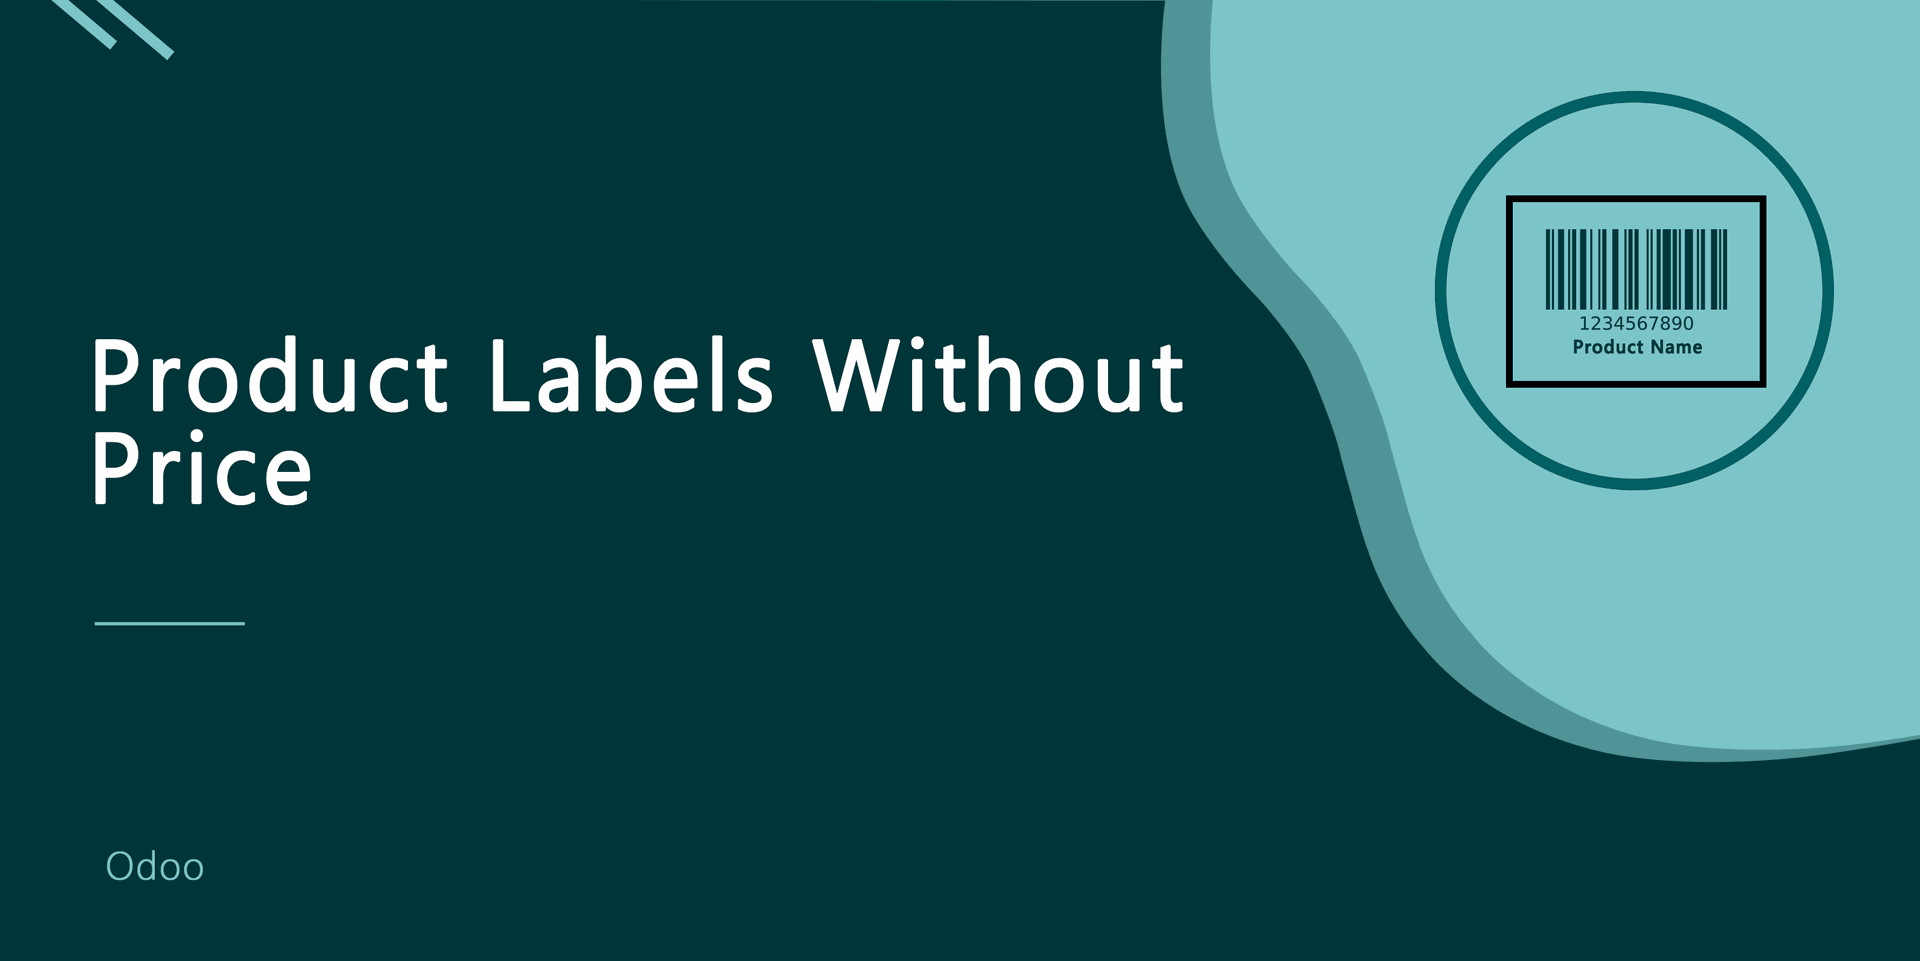 Product Labels Without Price
